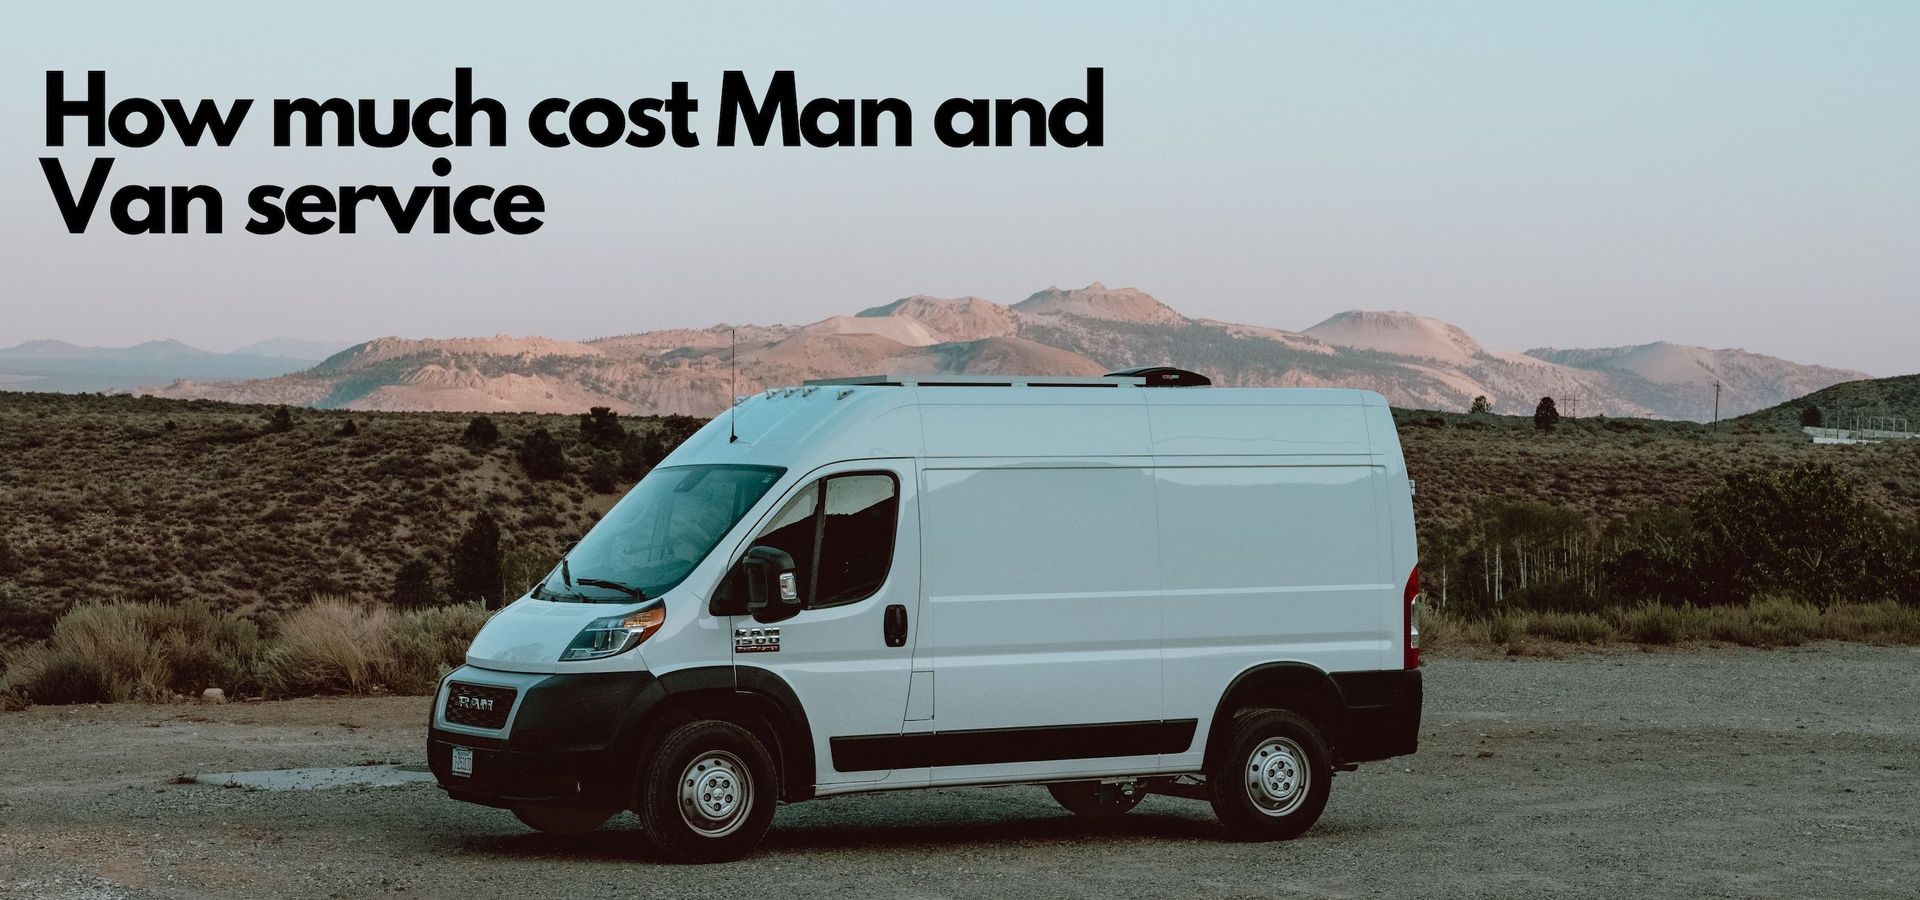 Easy man and van Removals